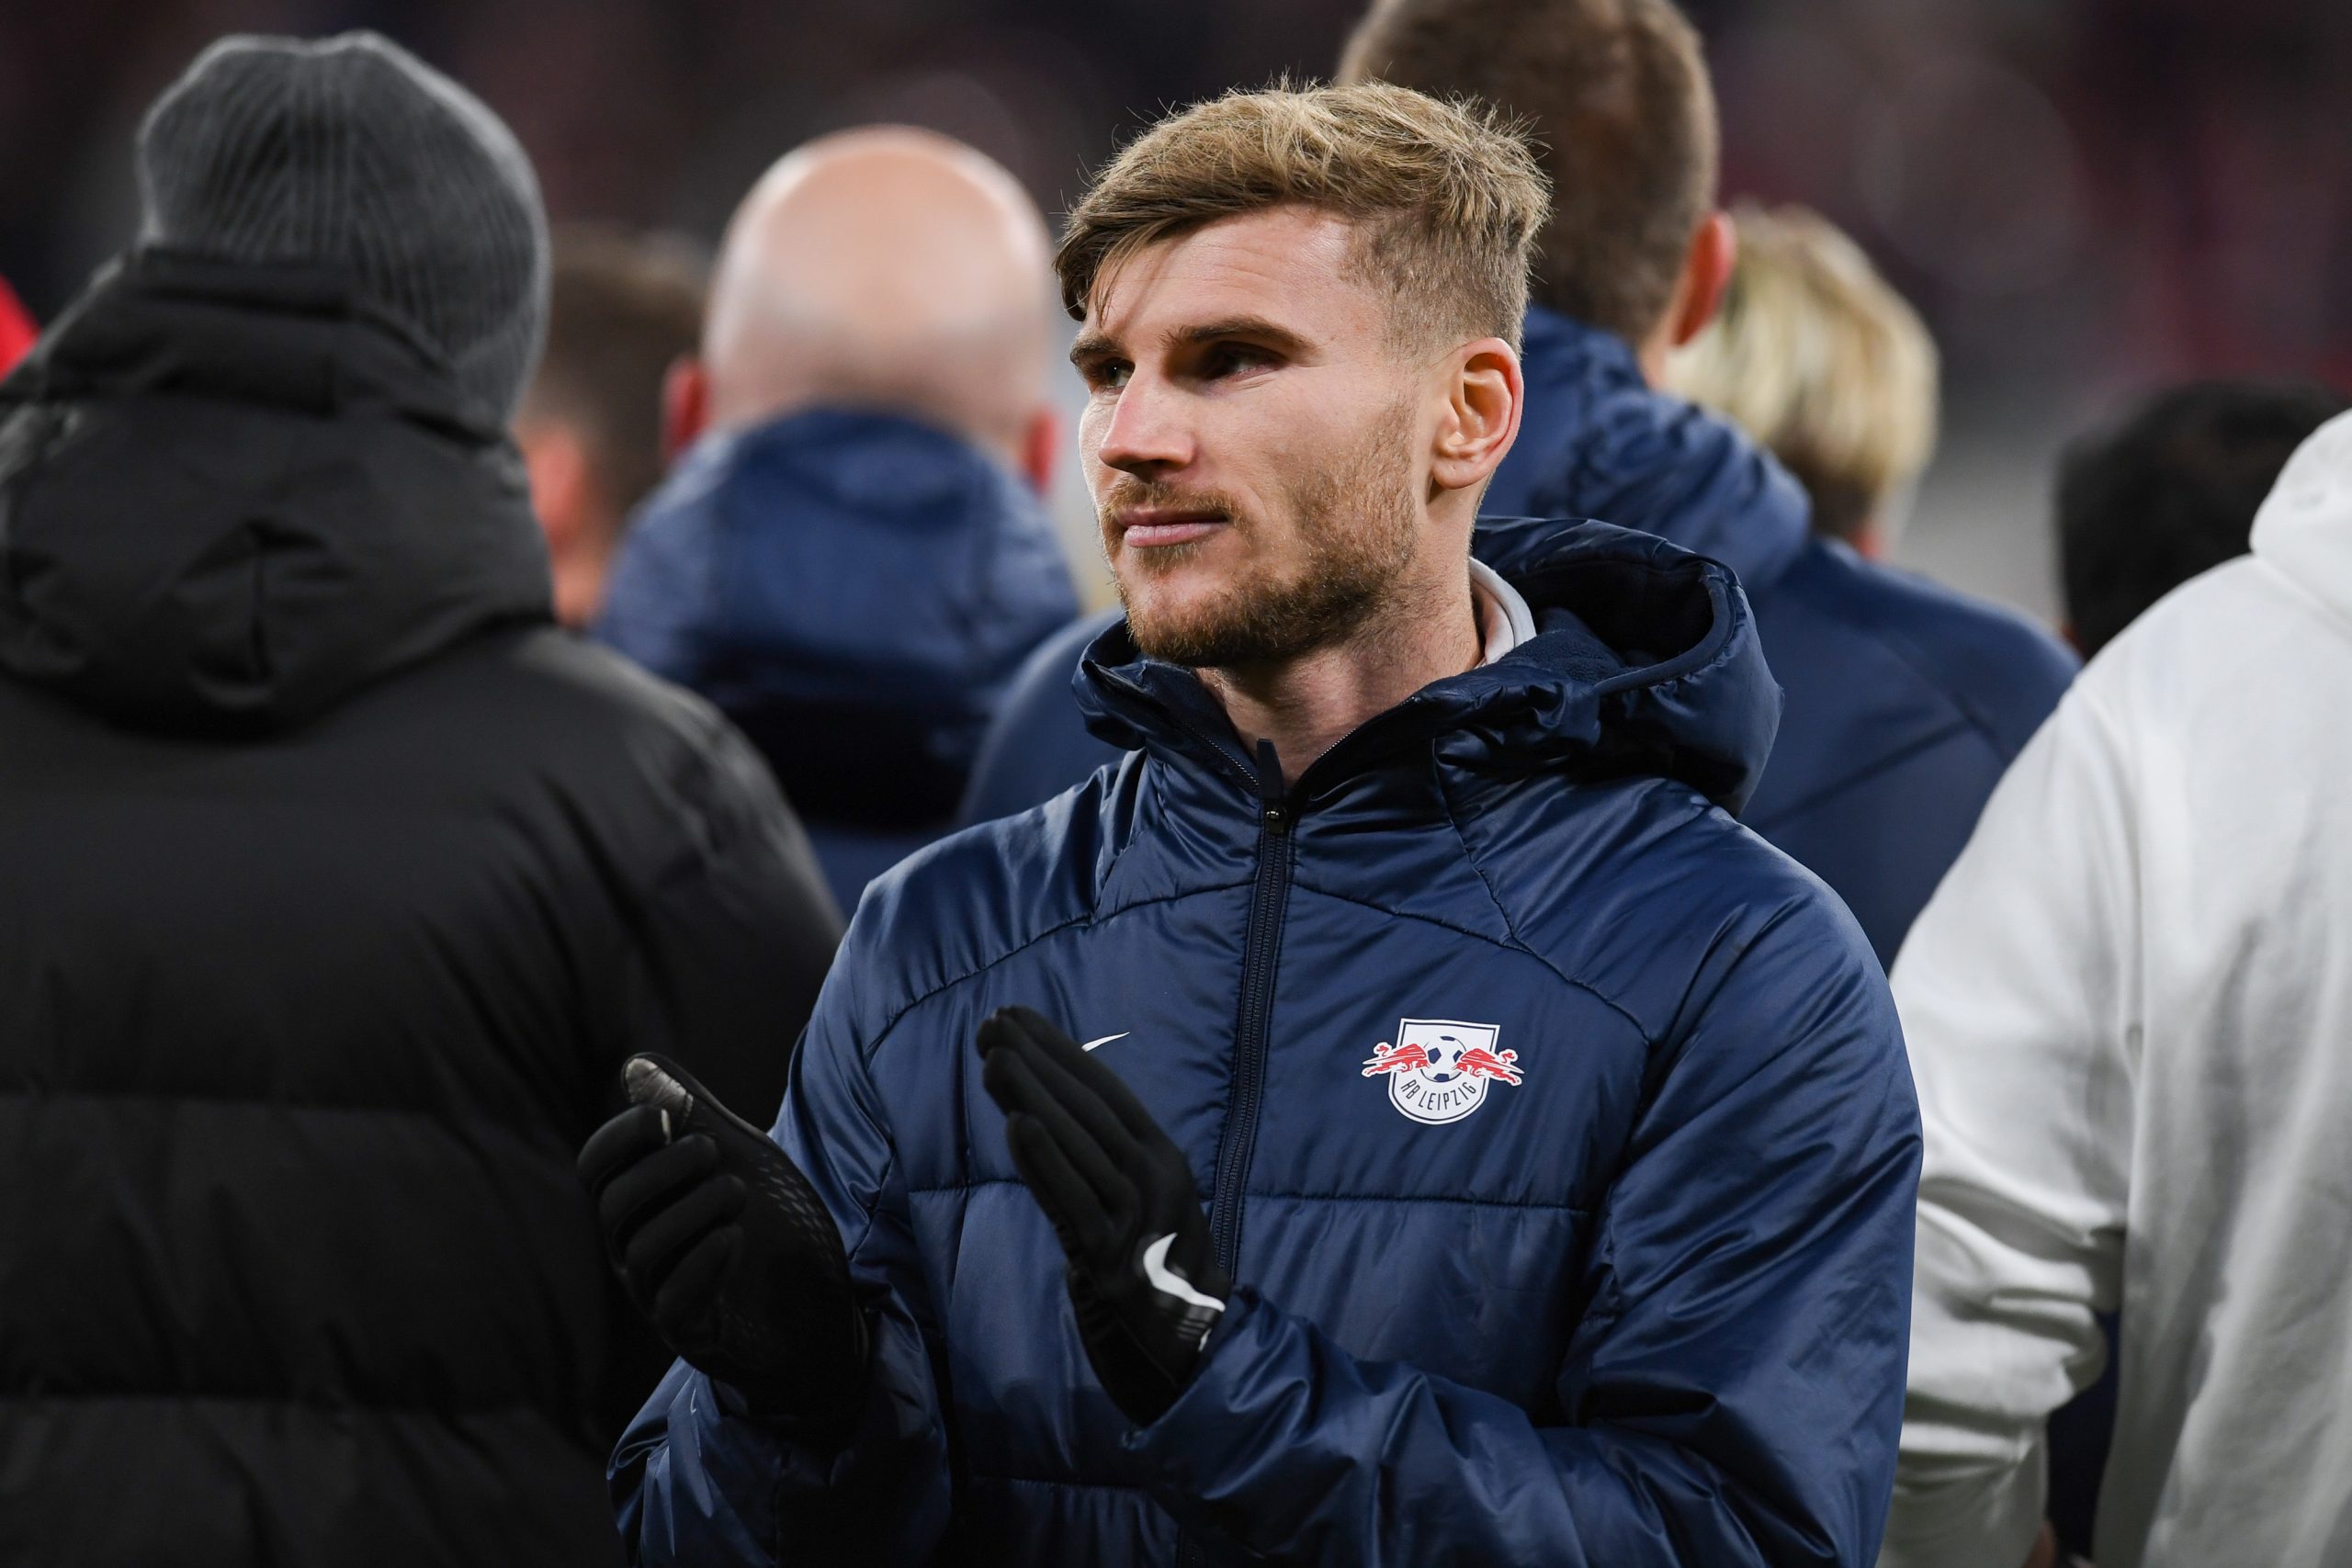 Timo Werner impressed in his Tottenham Hotspur debut against Manchester United.